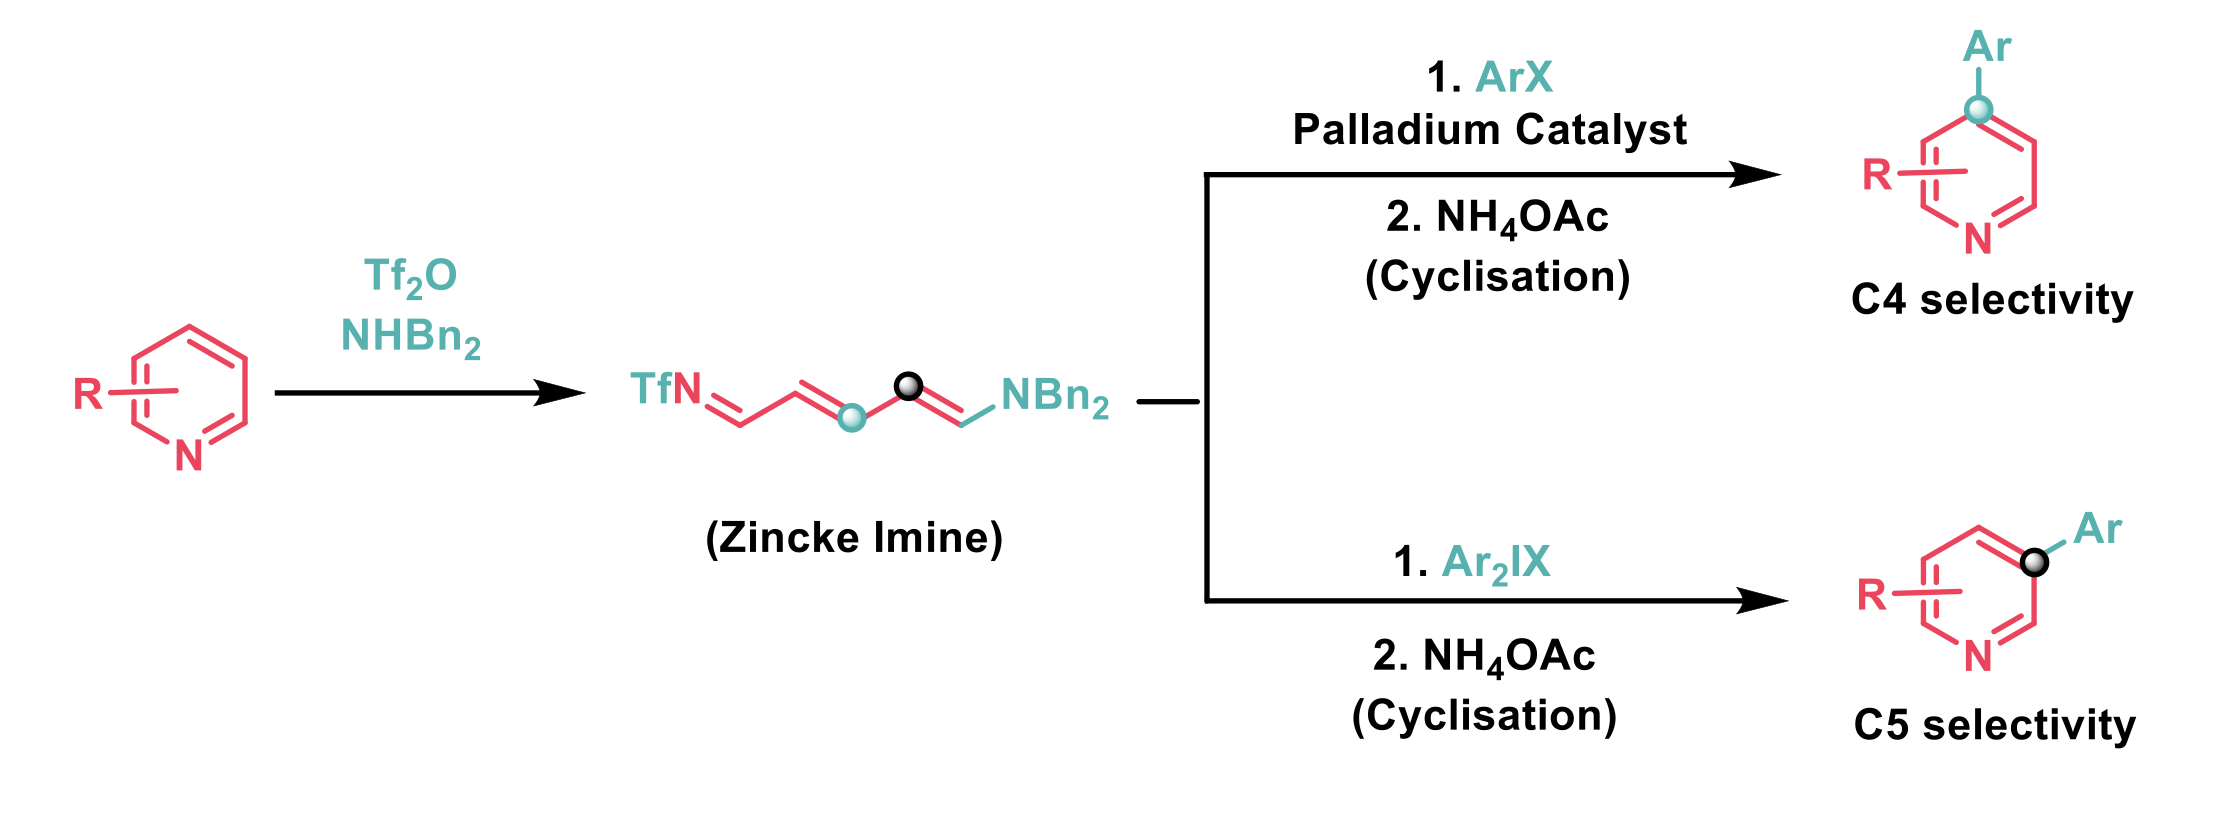 Zincke imines, which are formed by the treatment of pyridine with triflic anhydride and a secondary amine undergo regiodivergent arylation.